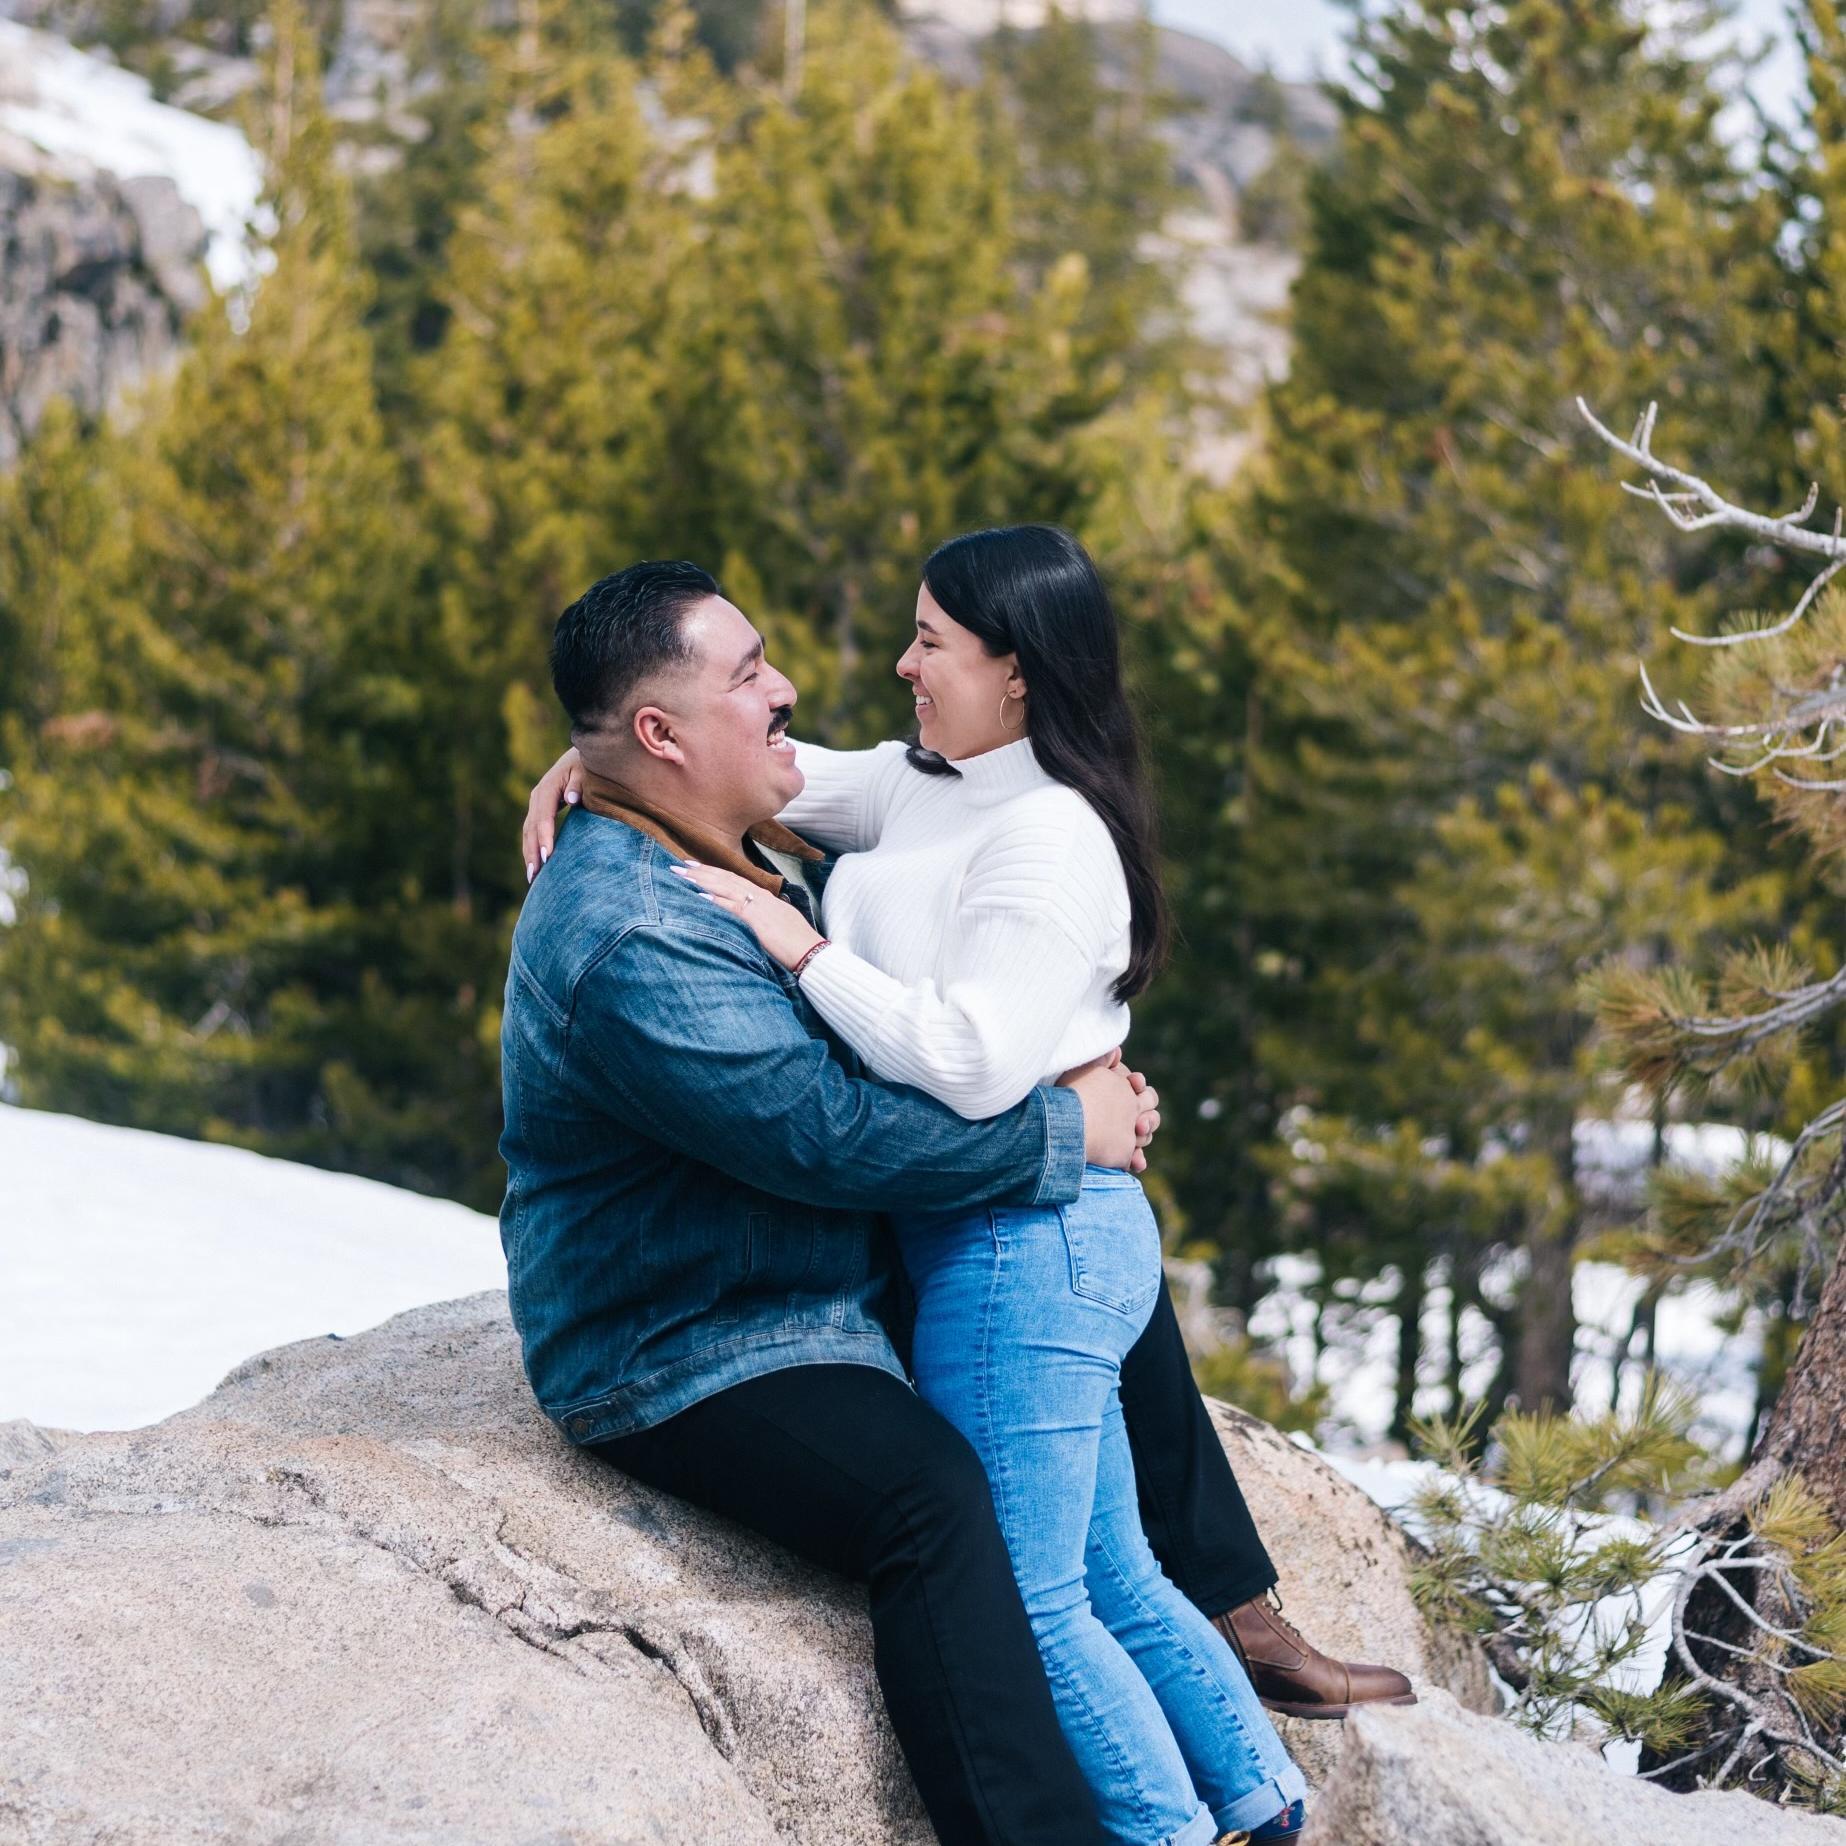 Engagement photos in the snow! Cold, but cute!